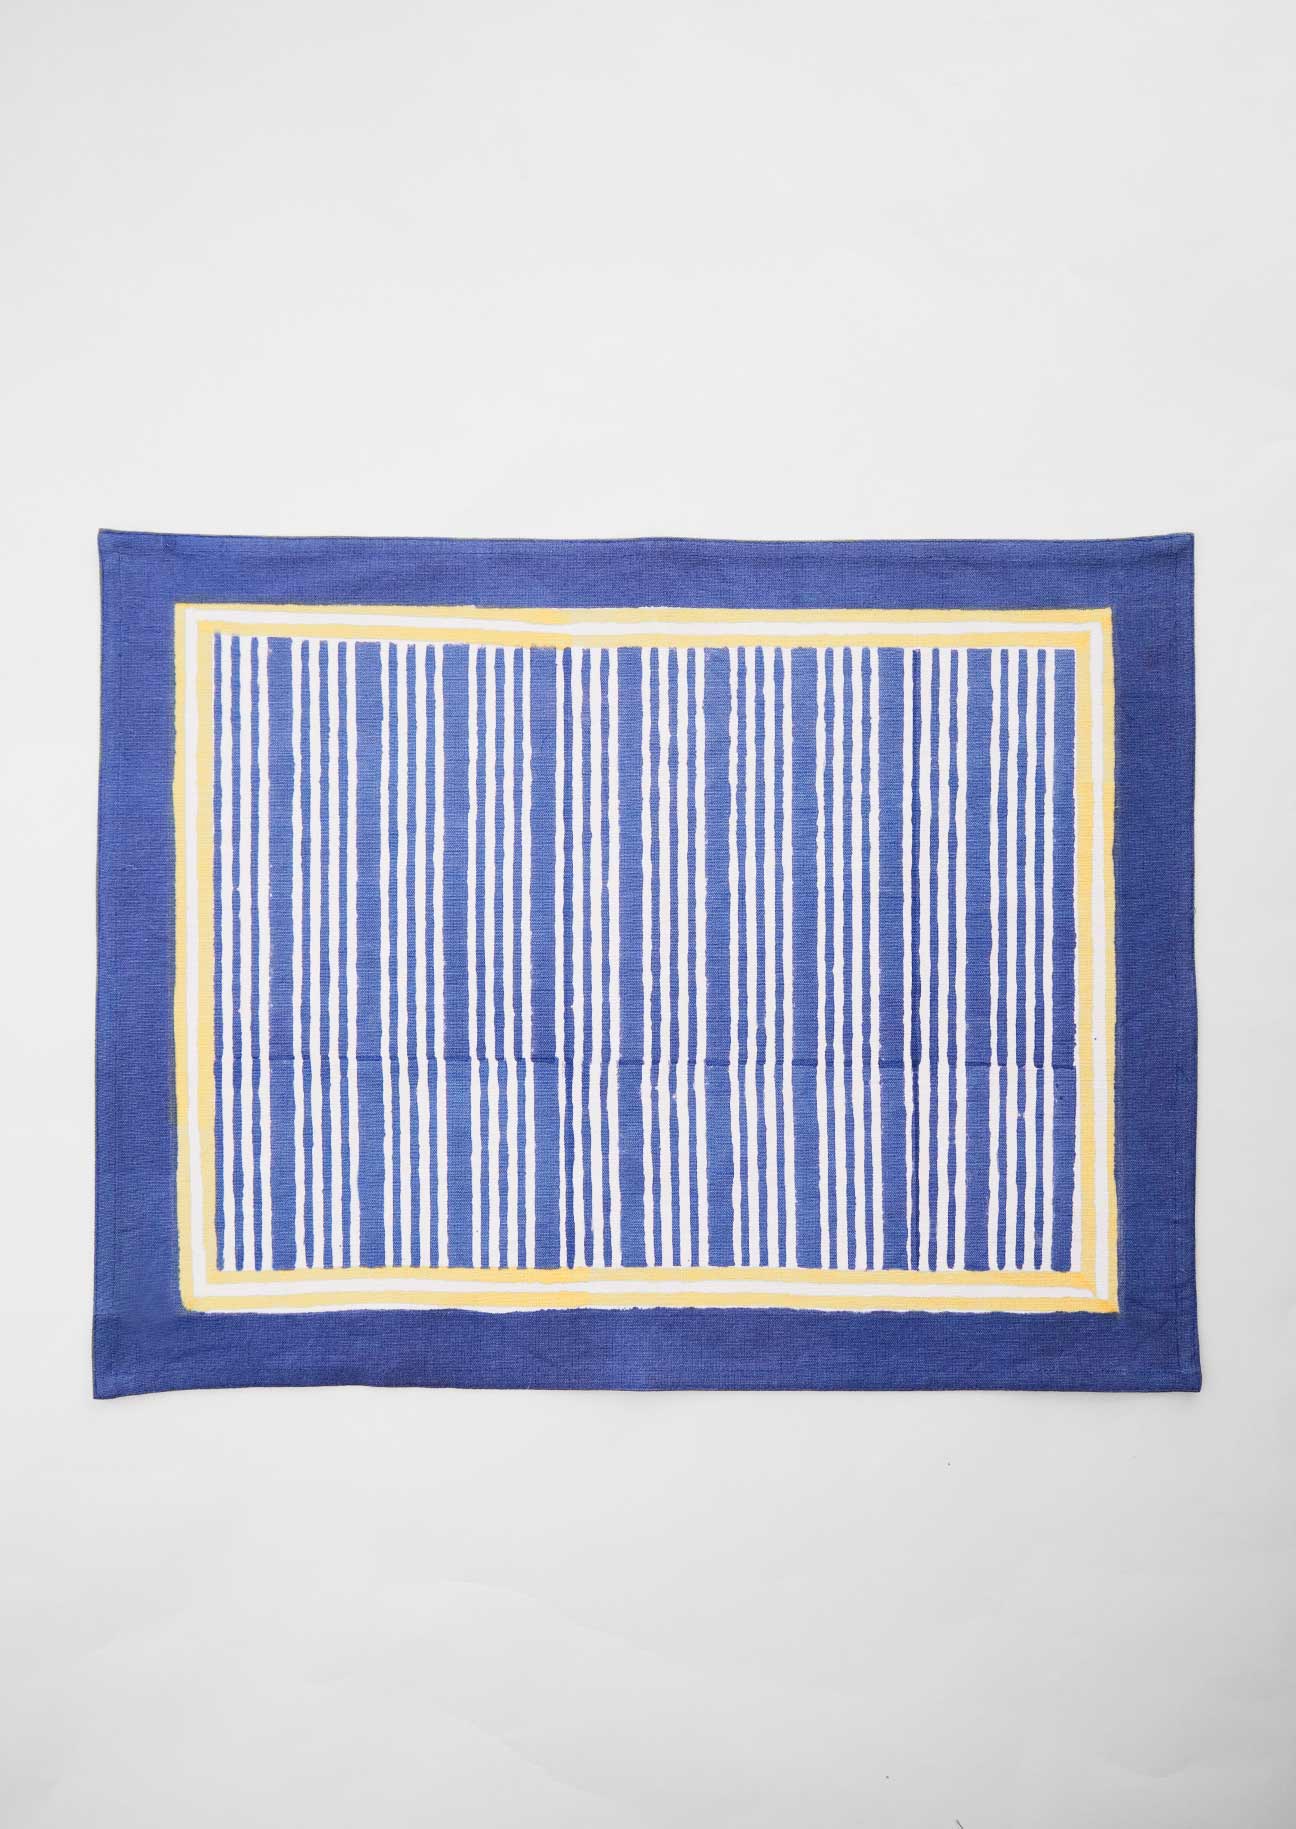 Single tablemat in block printed irregular stripe with solild navy edging and yellow stripe border detail.